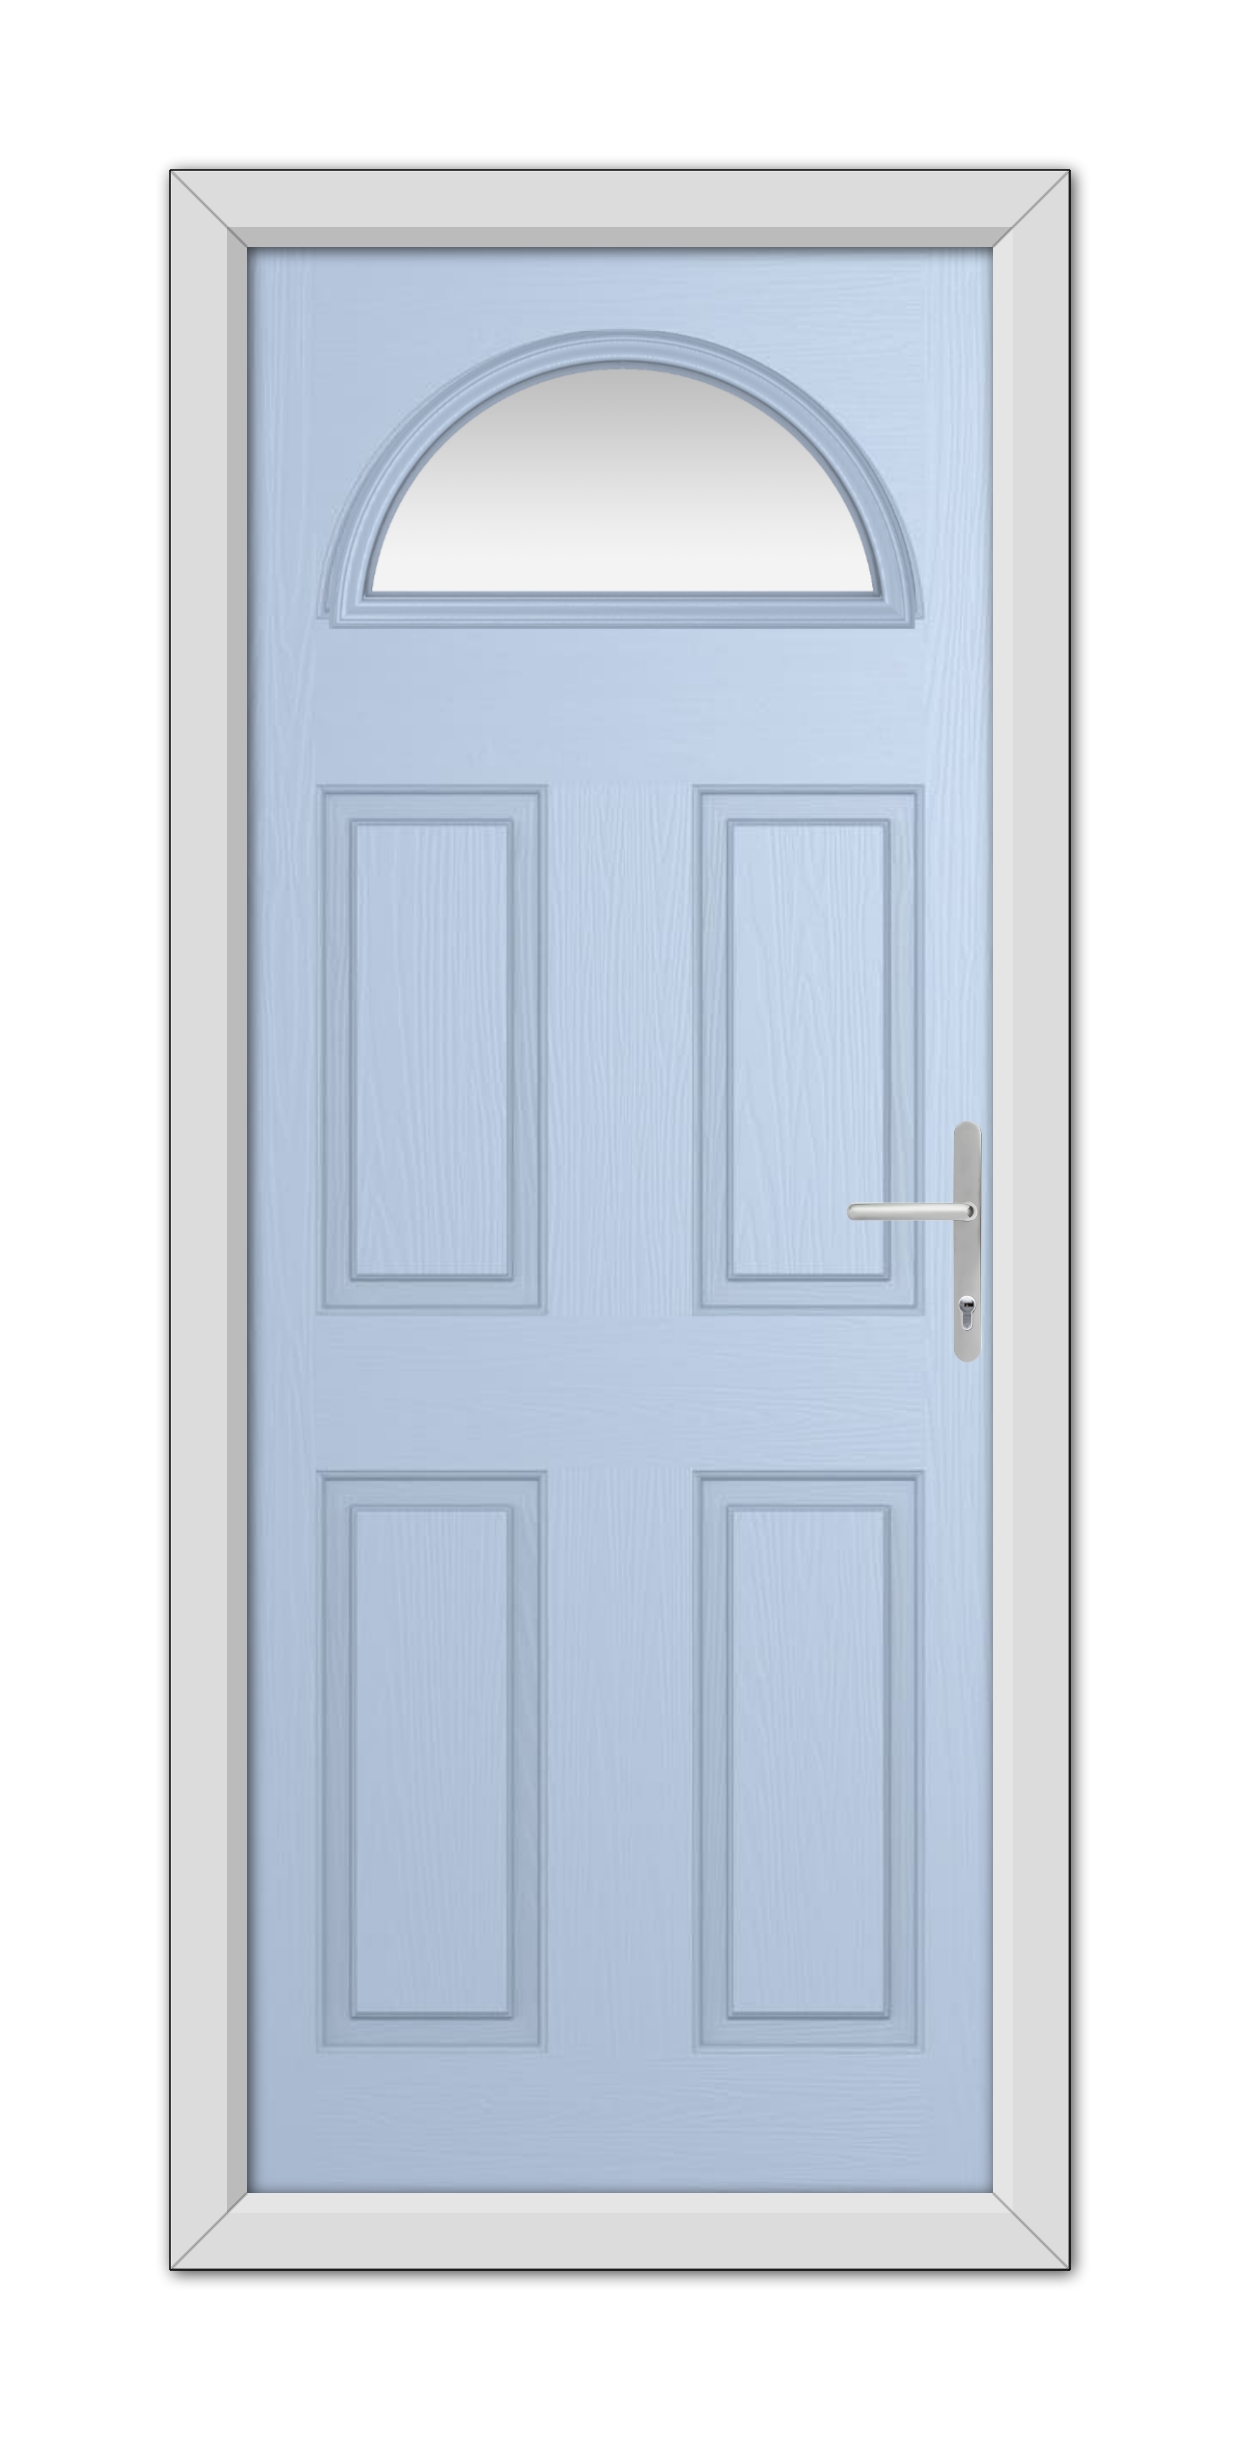 A Duck Egg Blue Winslow 1 Composite Door 48mm Timber Core with six panels and an arched window at the top, featuring a silver handle on the right side.